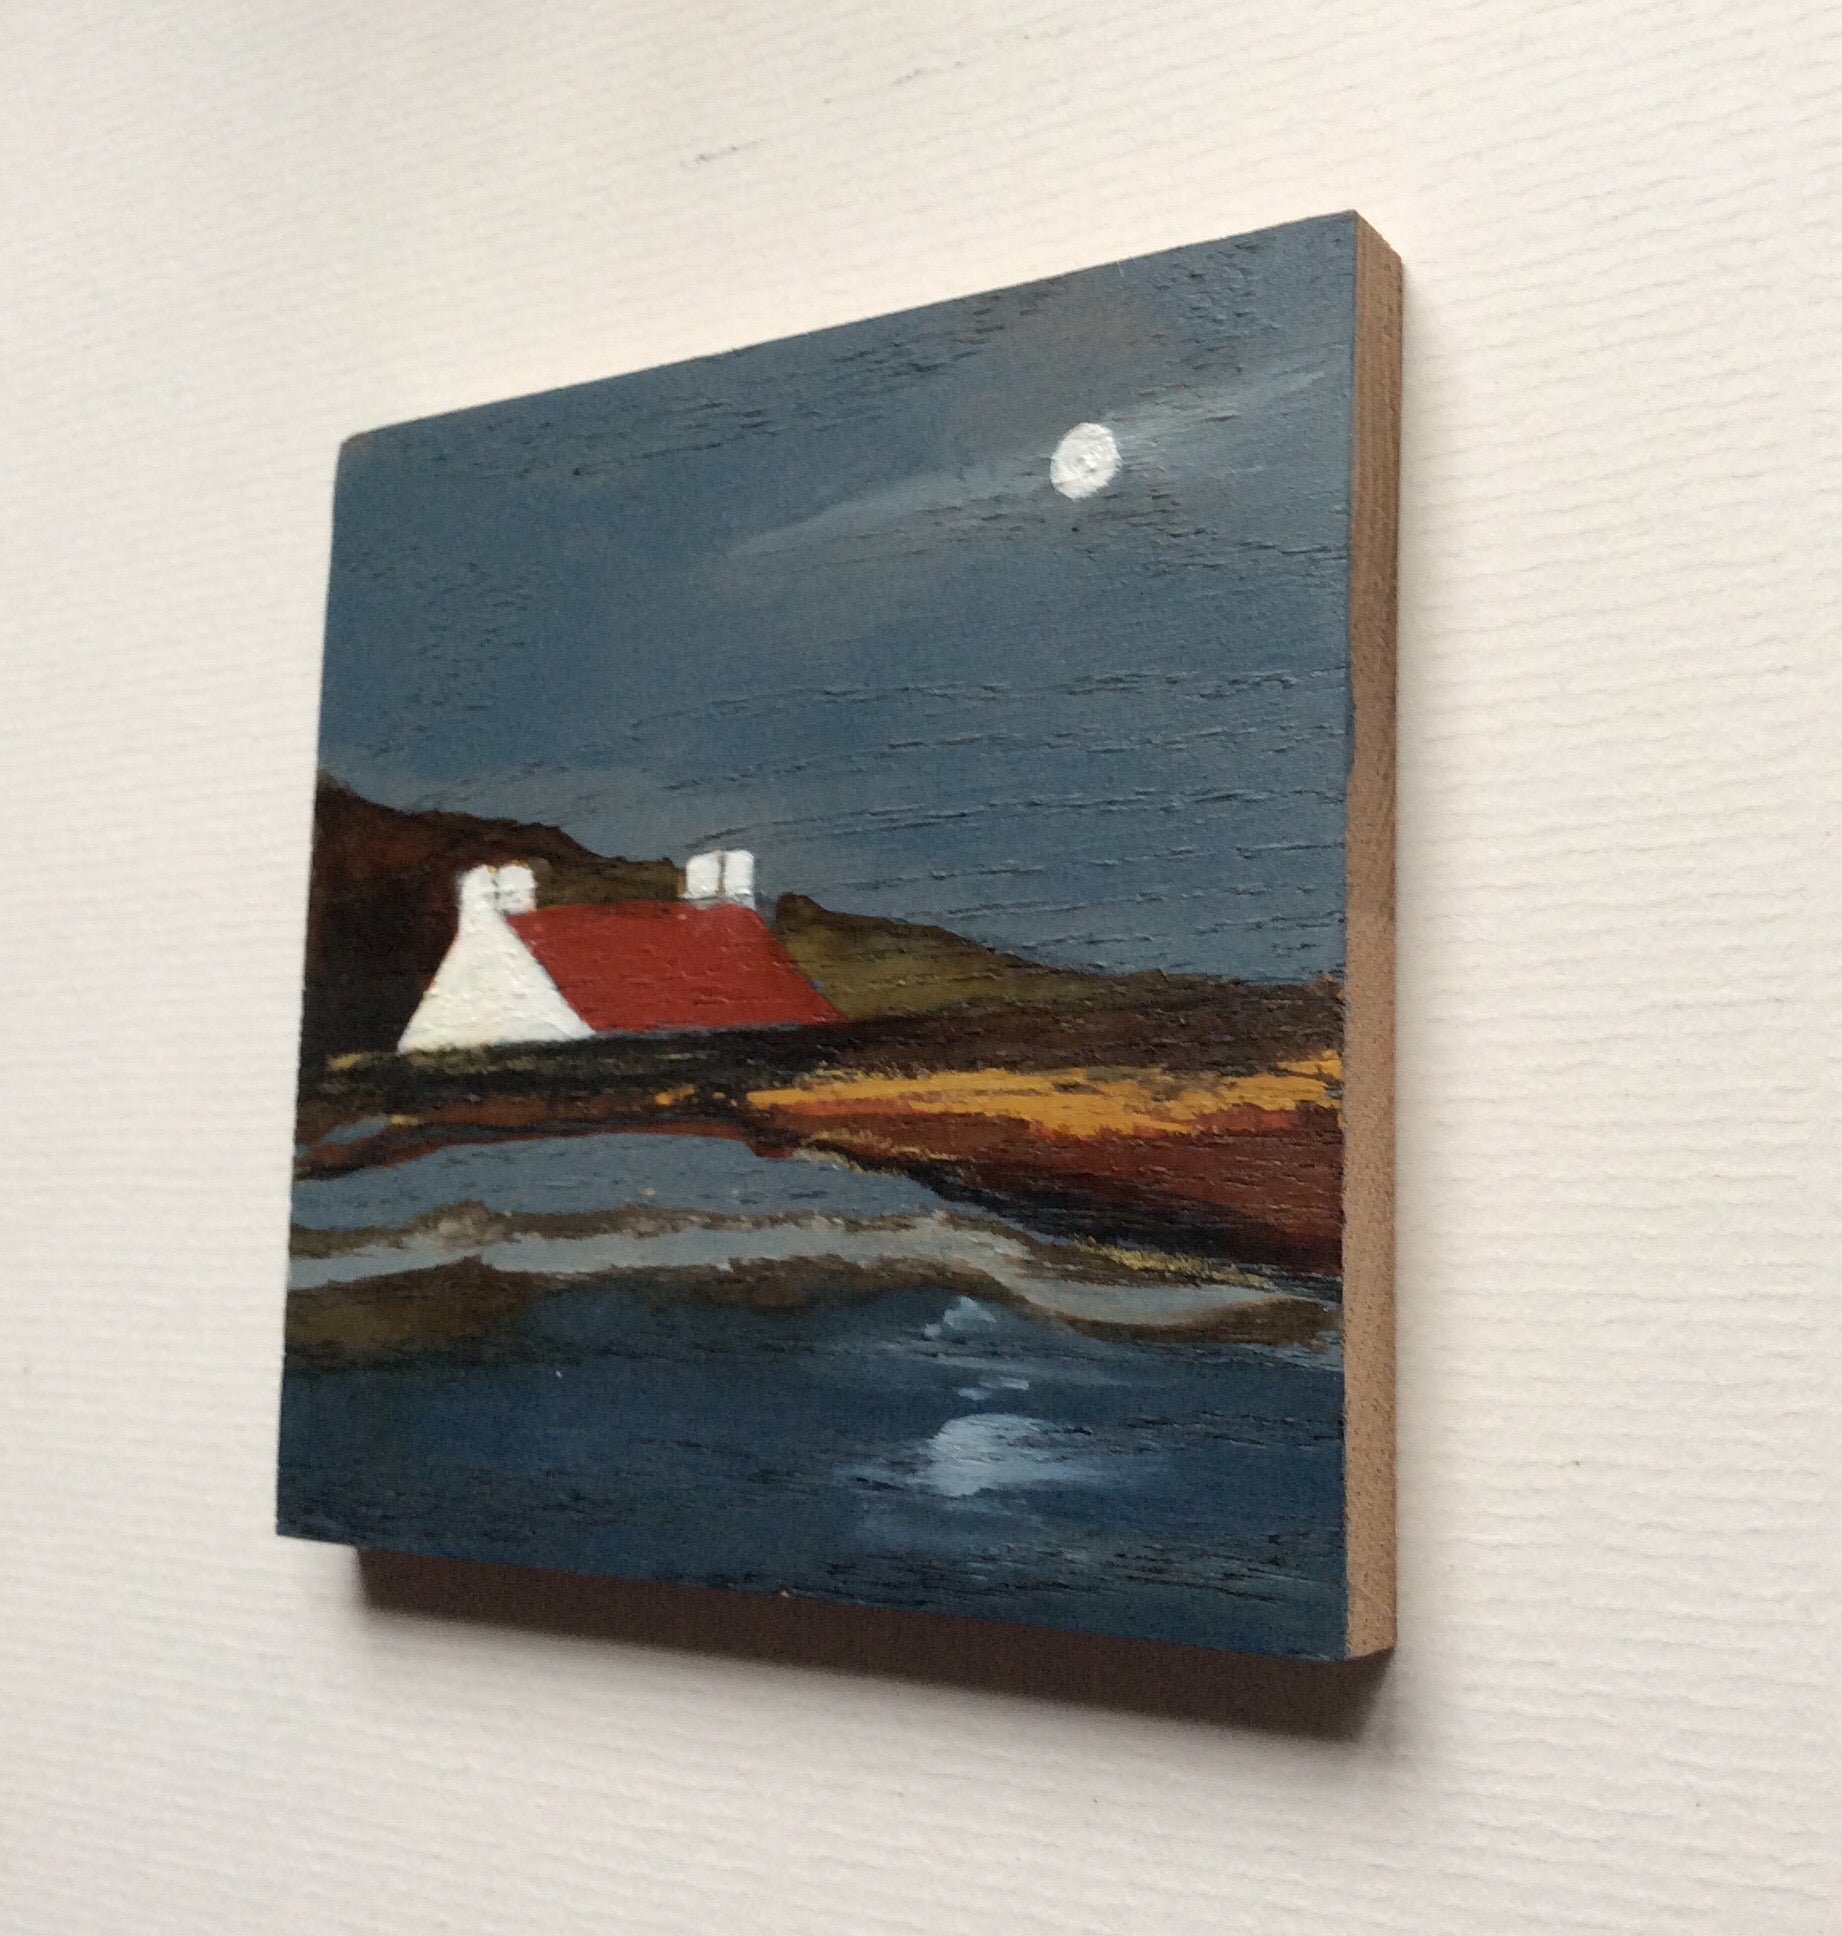 Mixed Media Art on wood By Louise O'Hara - "The Cottage with the red roof”